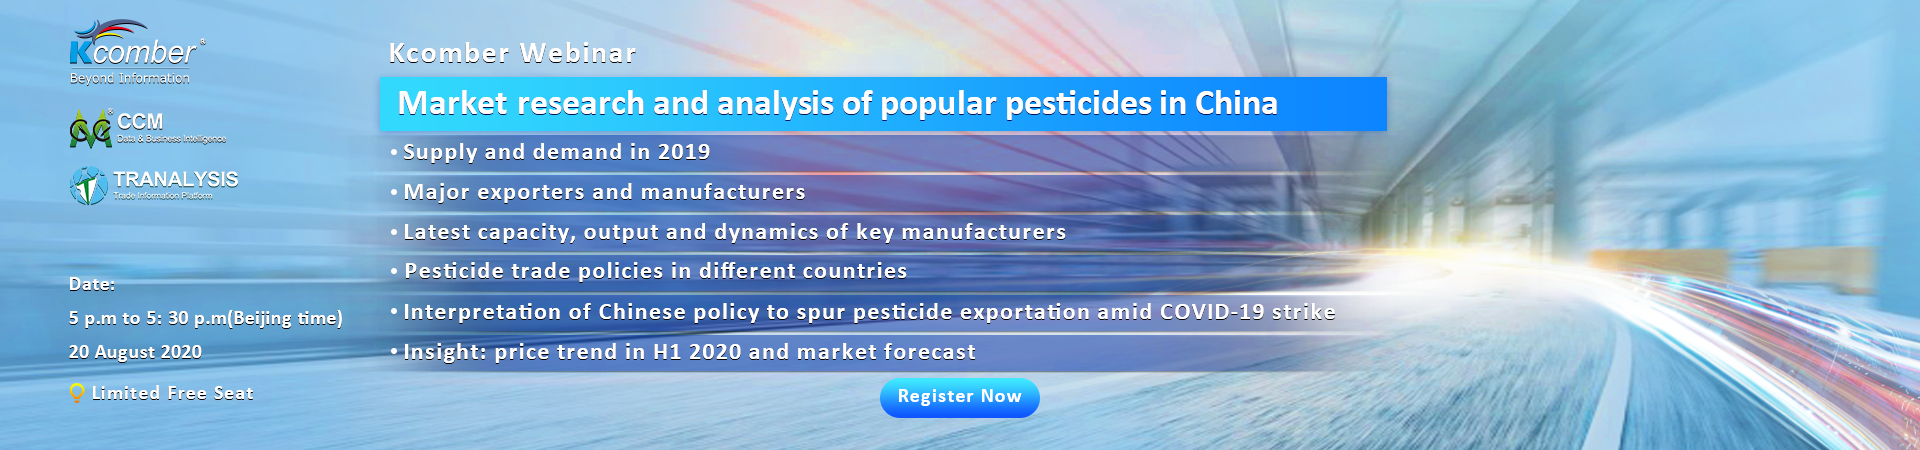 Market research and analysis of popular pesticides in China